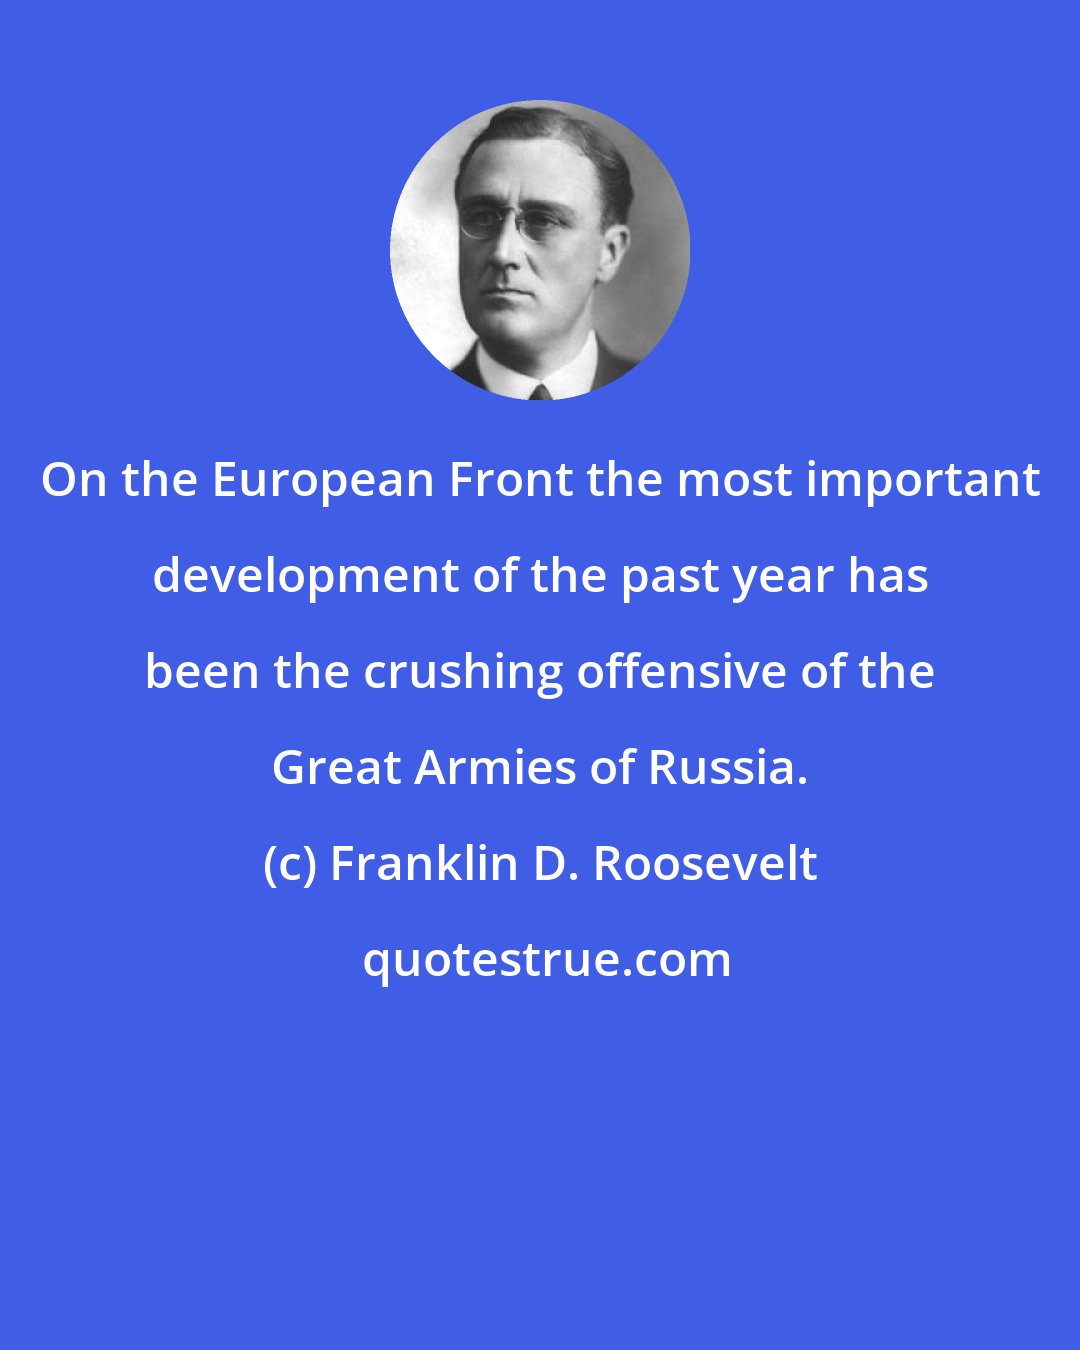 Franklin D. Roosevelt: On the European Front the most important development of the past year has been the crushing offensive of the Great Armies of Russia.